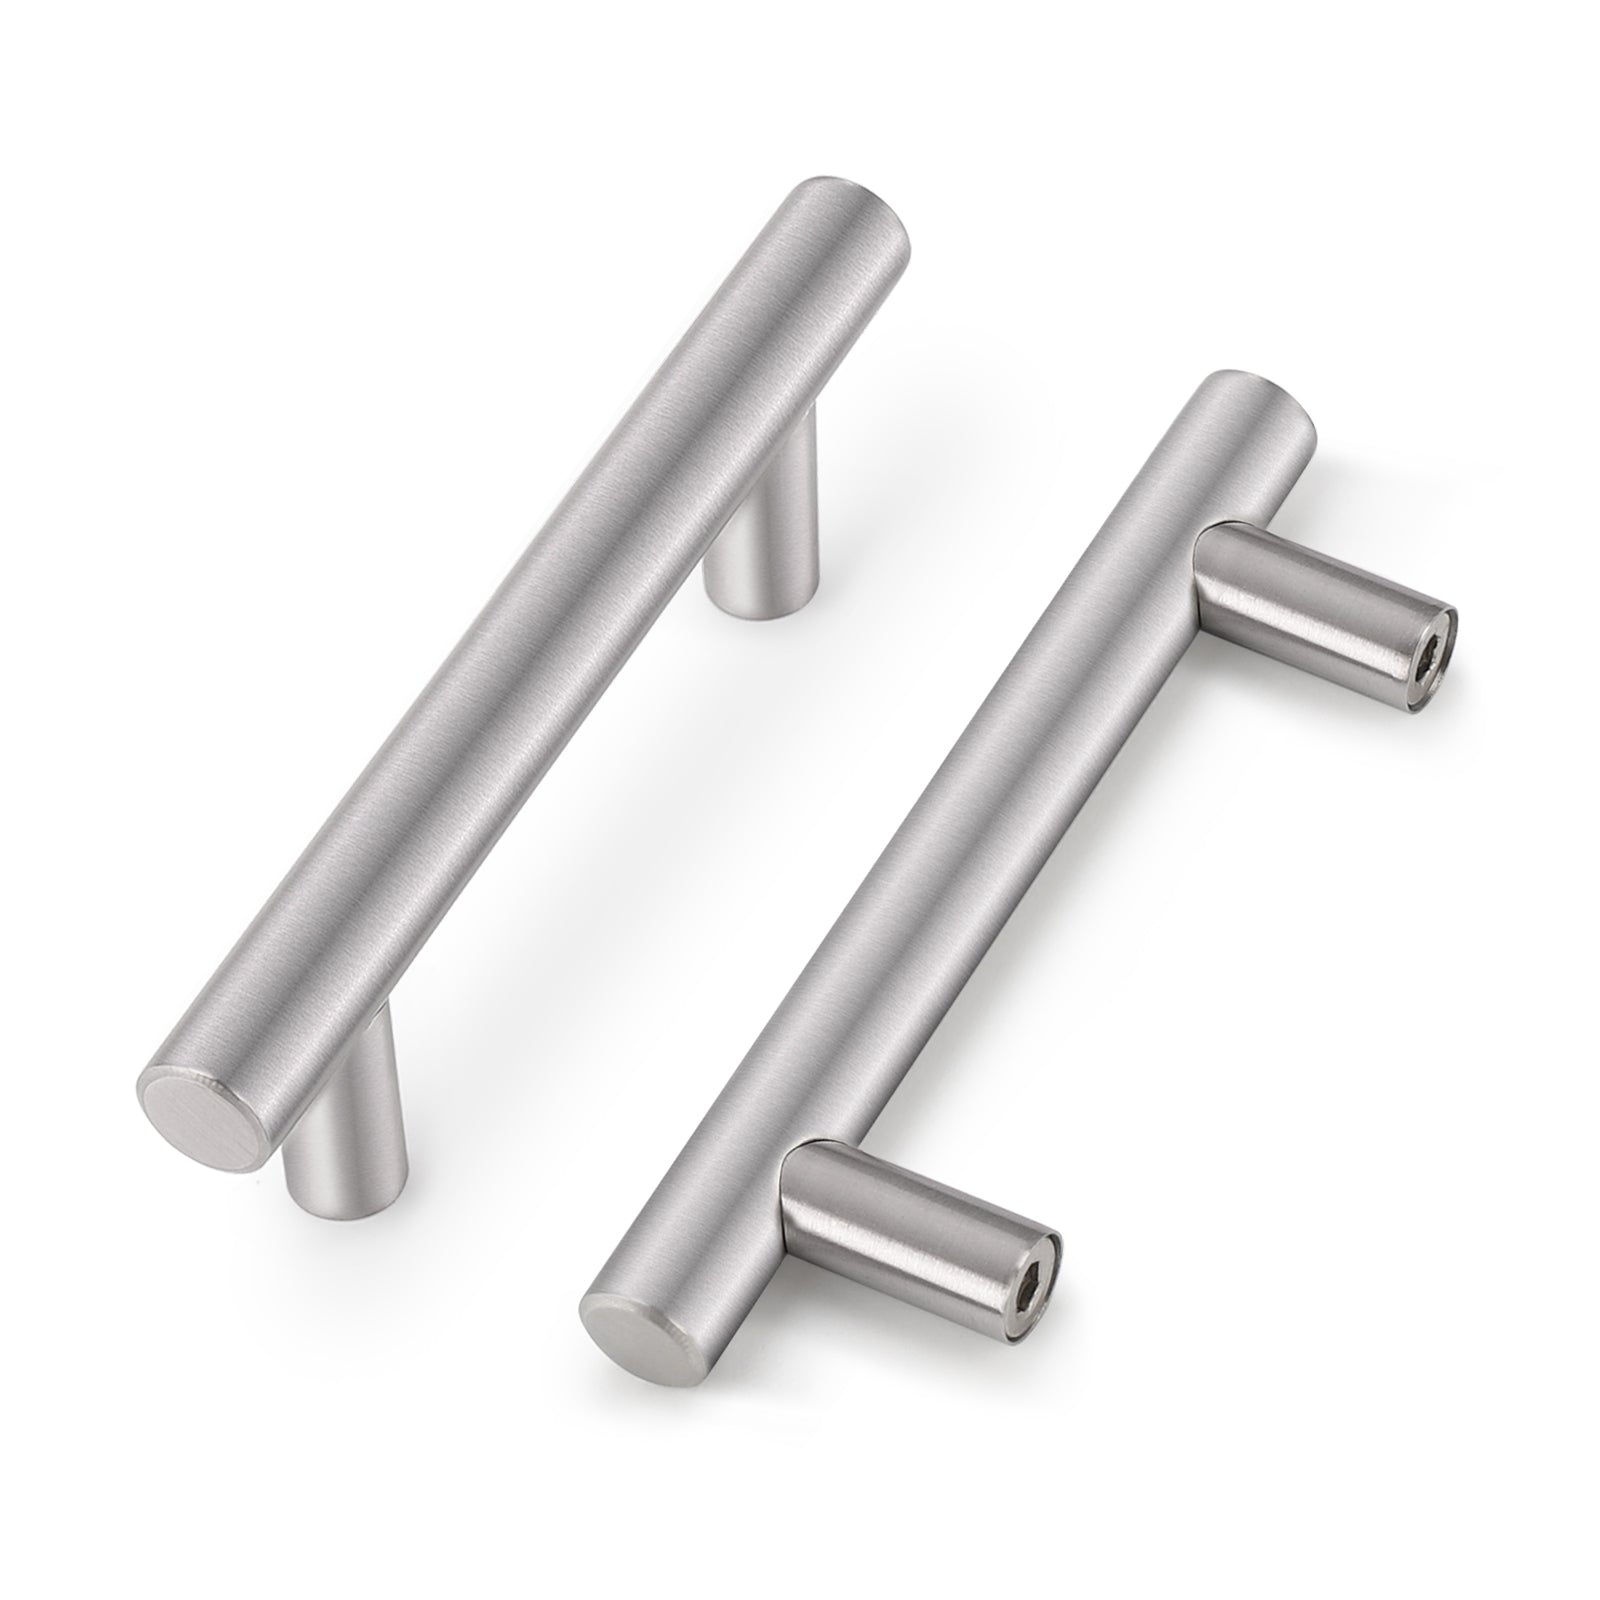 Probrico Stainless Steel Cabinet Handles Brushed Nickel Kitchen Hardware Drawer Pulls 3" PD201HSS76-1000 pack